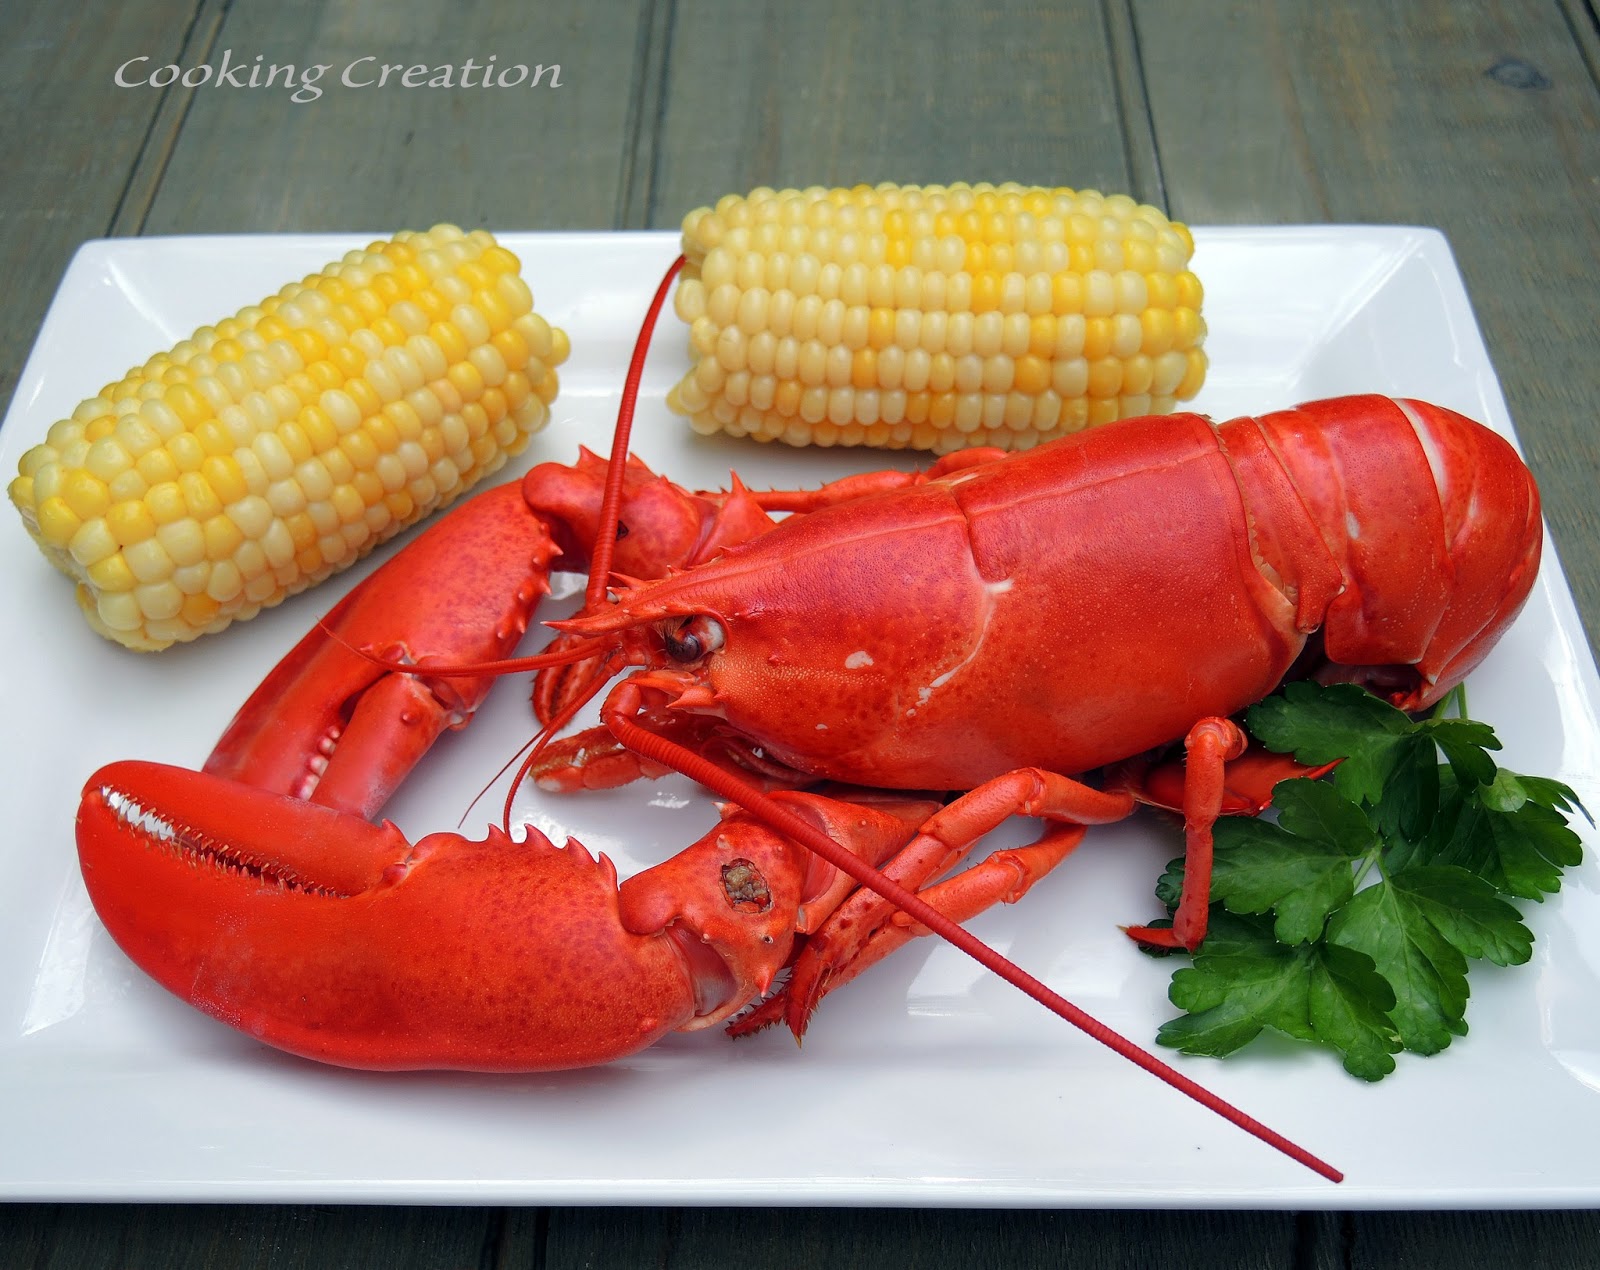 How long does it take to cook lobster per pound by steaming or boiling it?